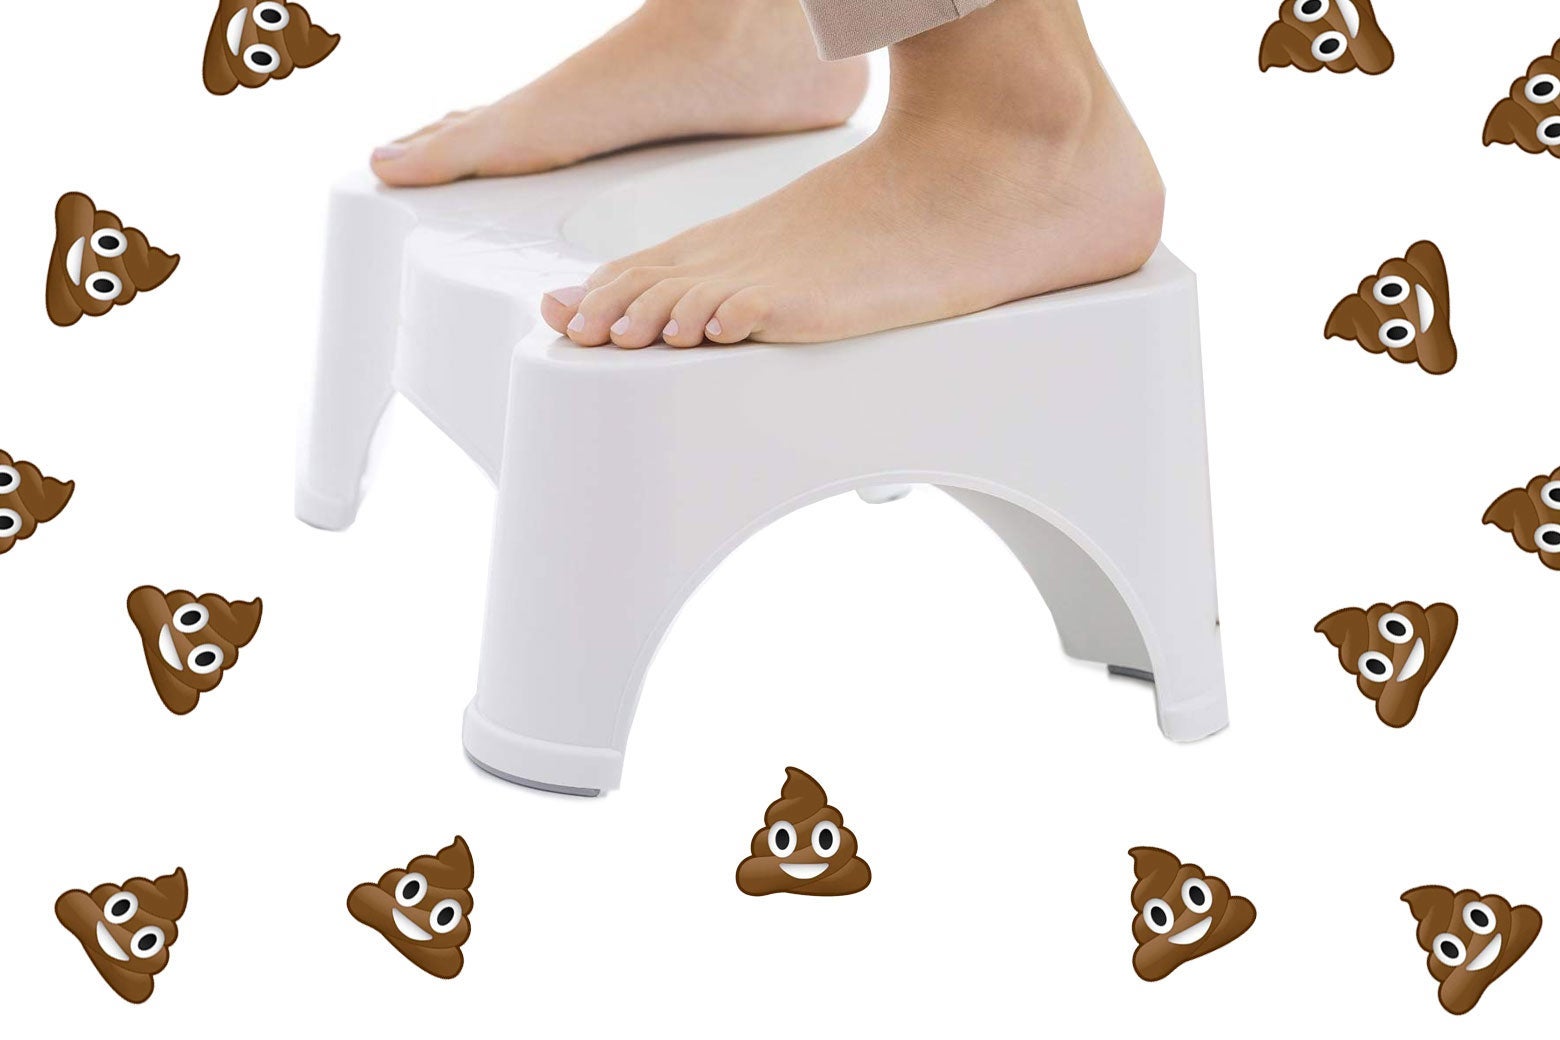 Squatty Potty - As Seen on TV